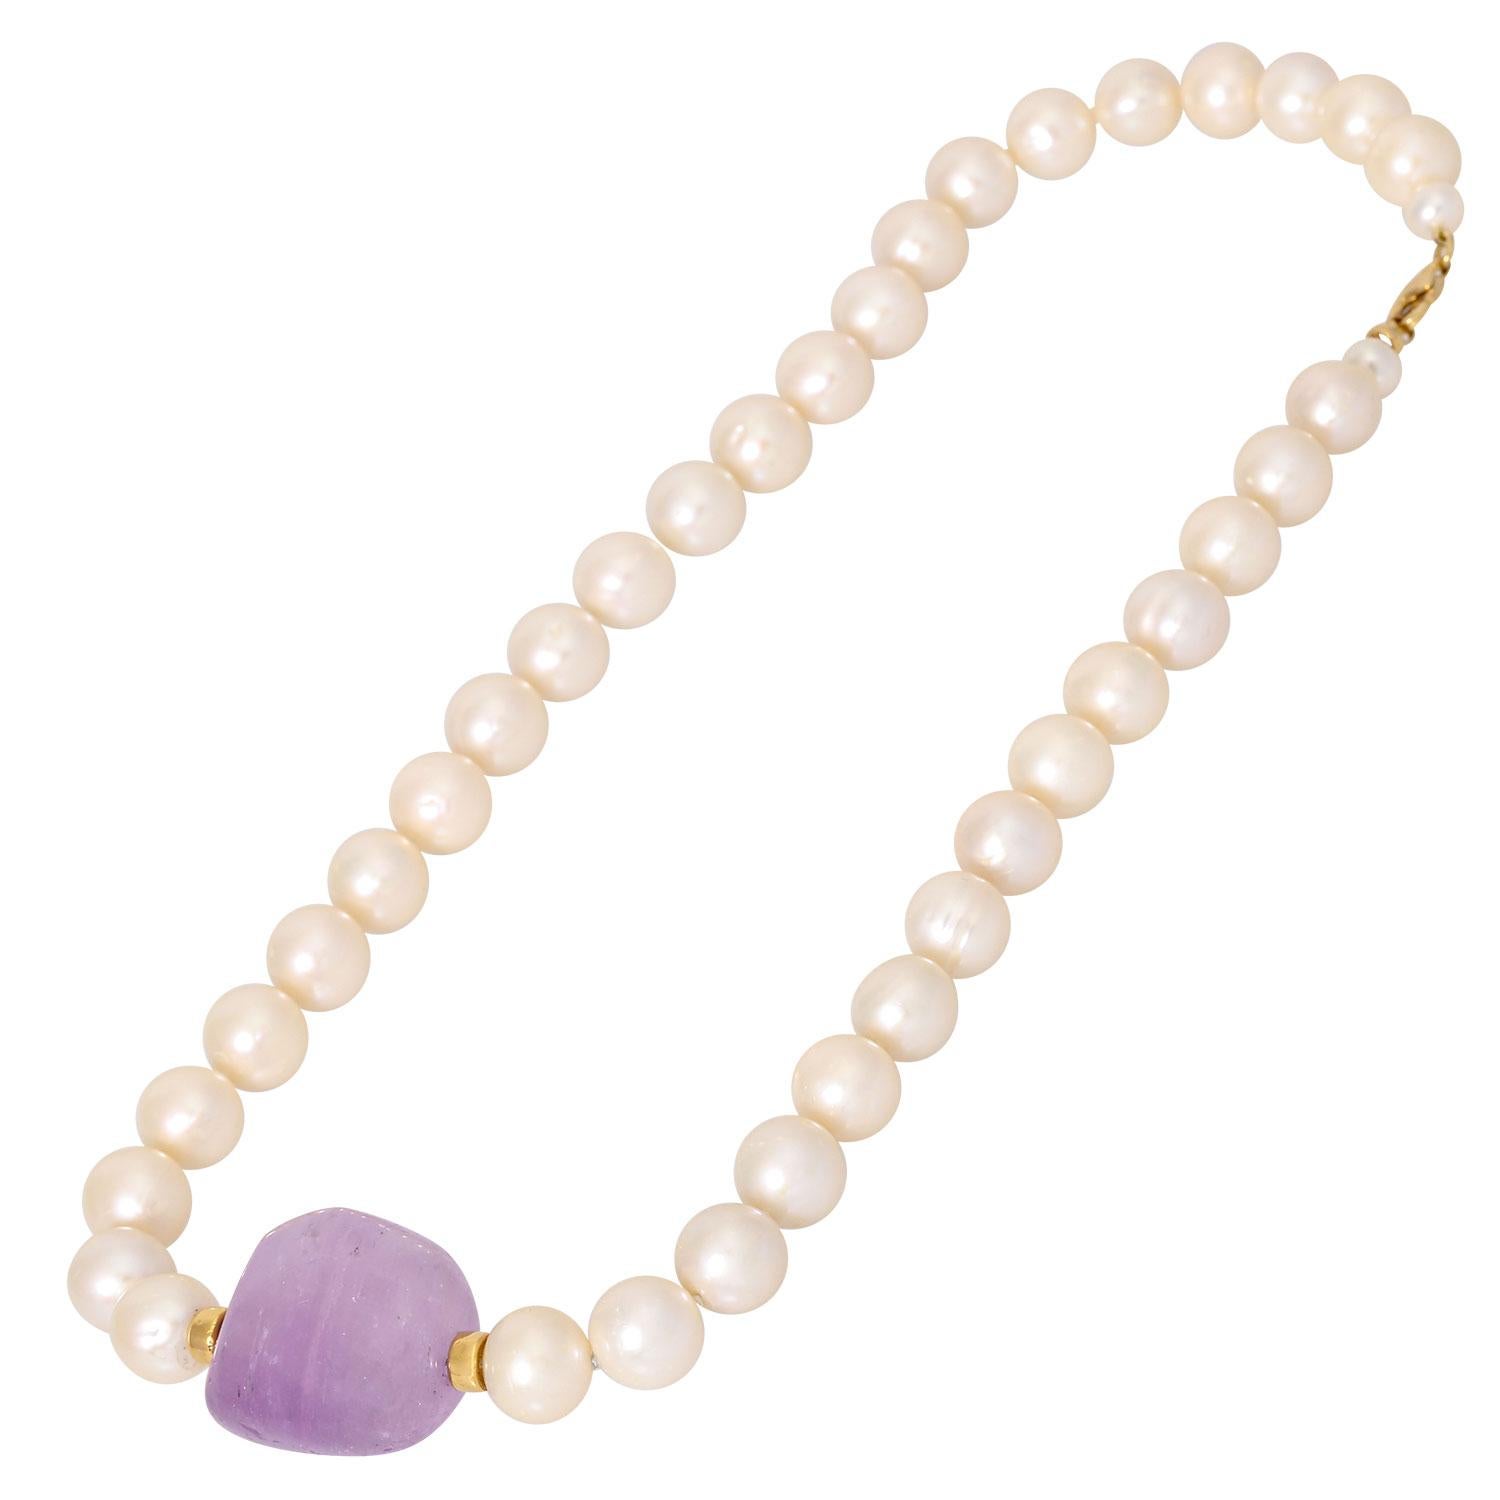 Uncut Freshwater Pearl Necklace For Sale